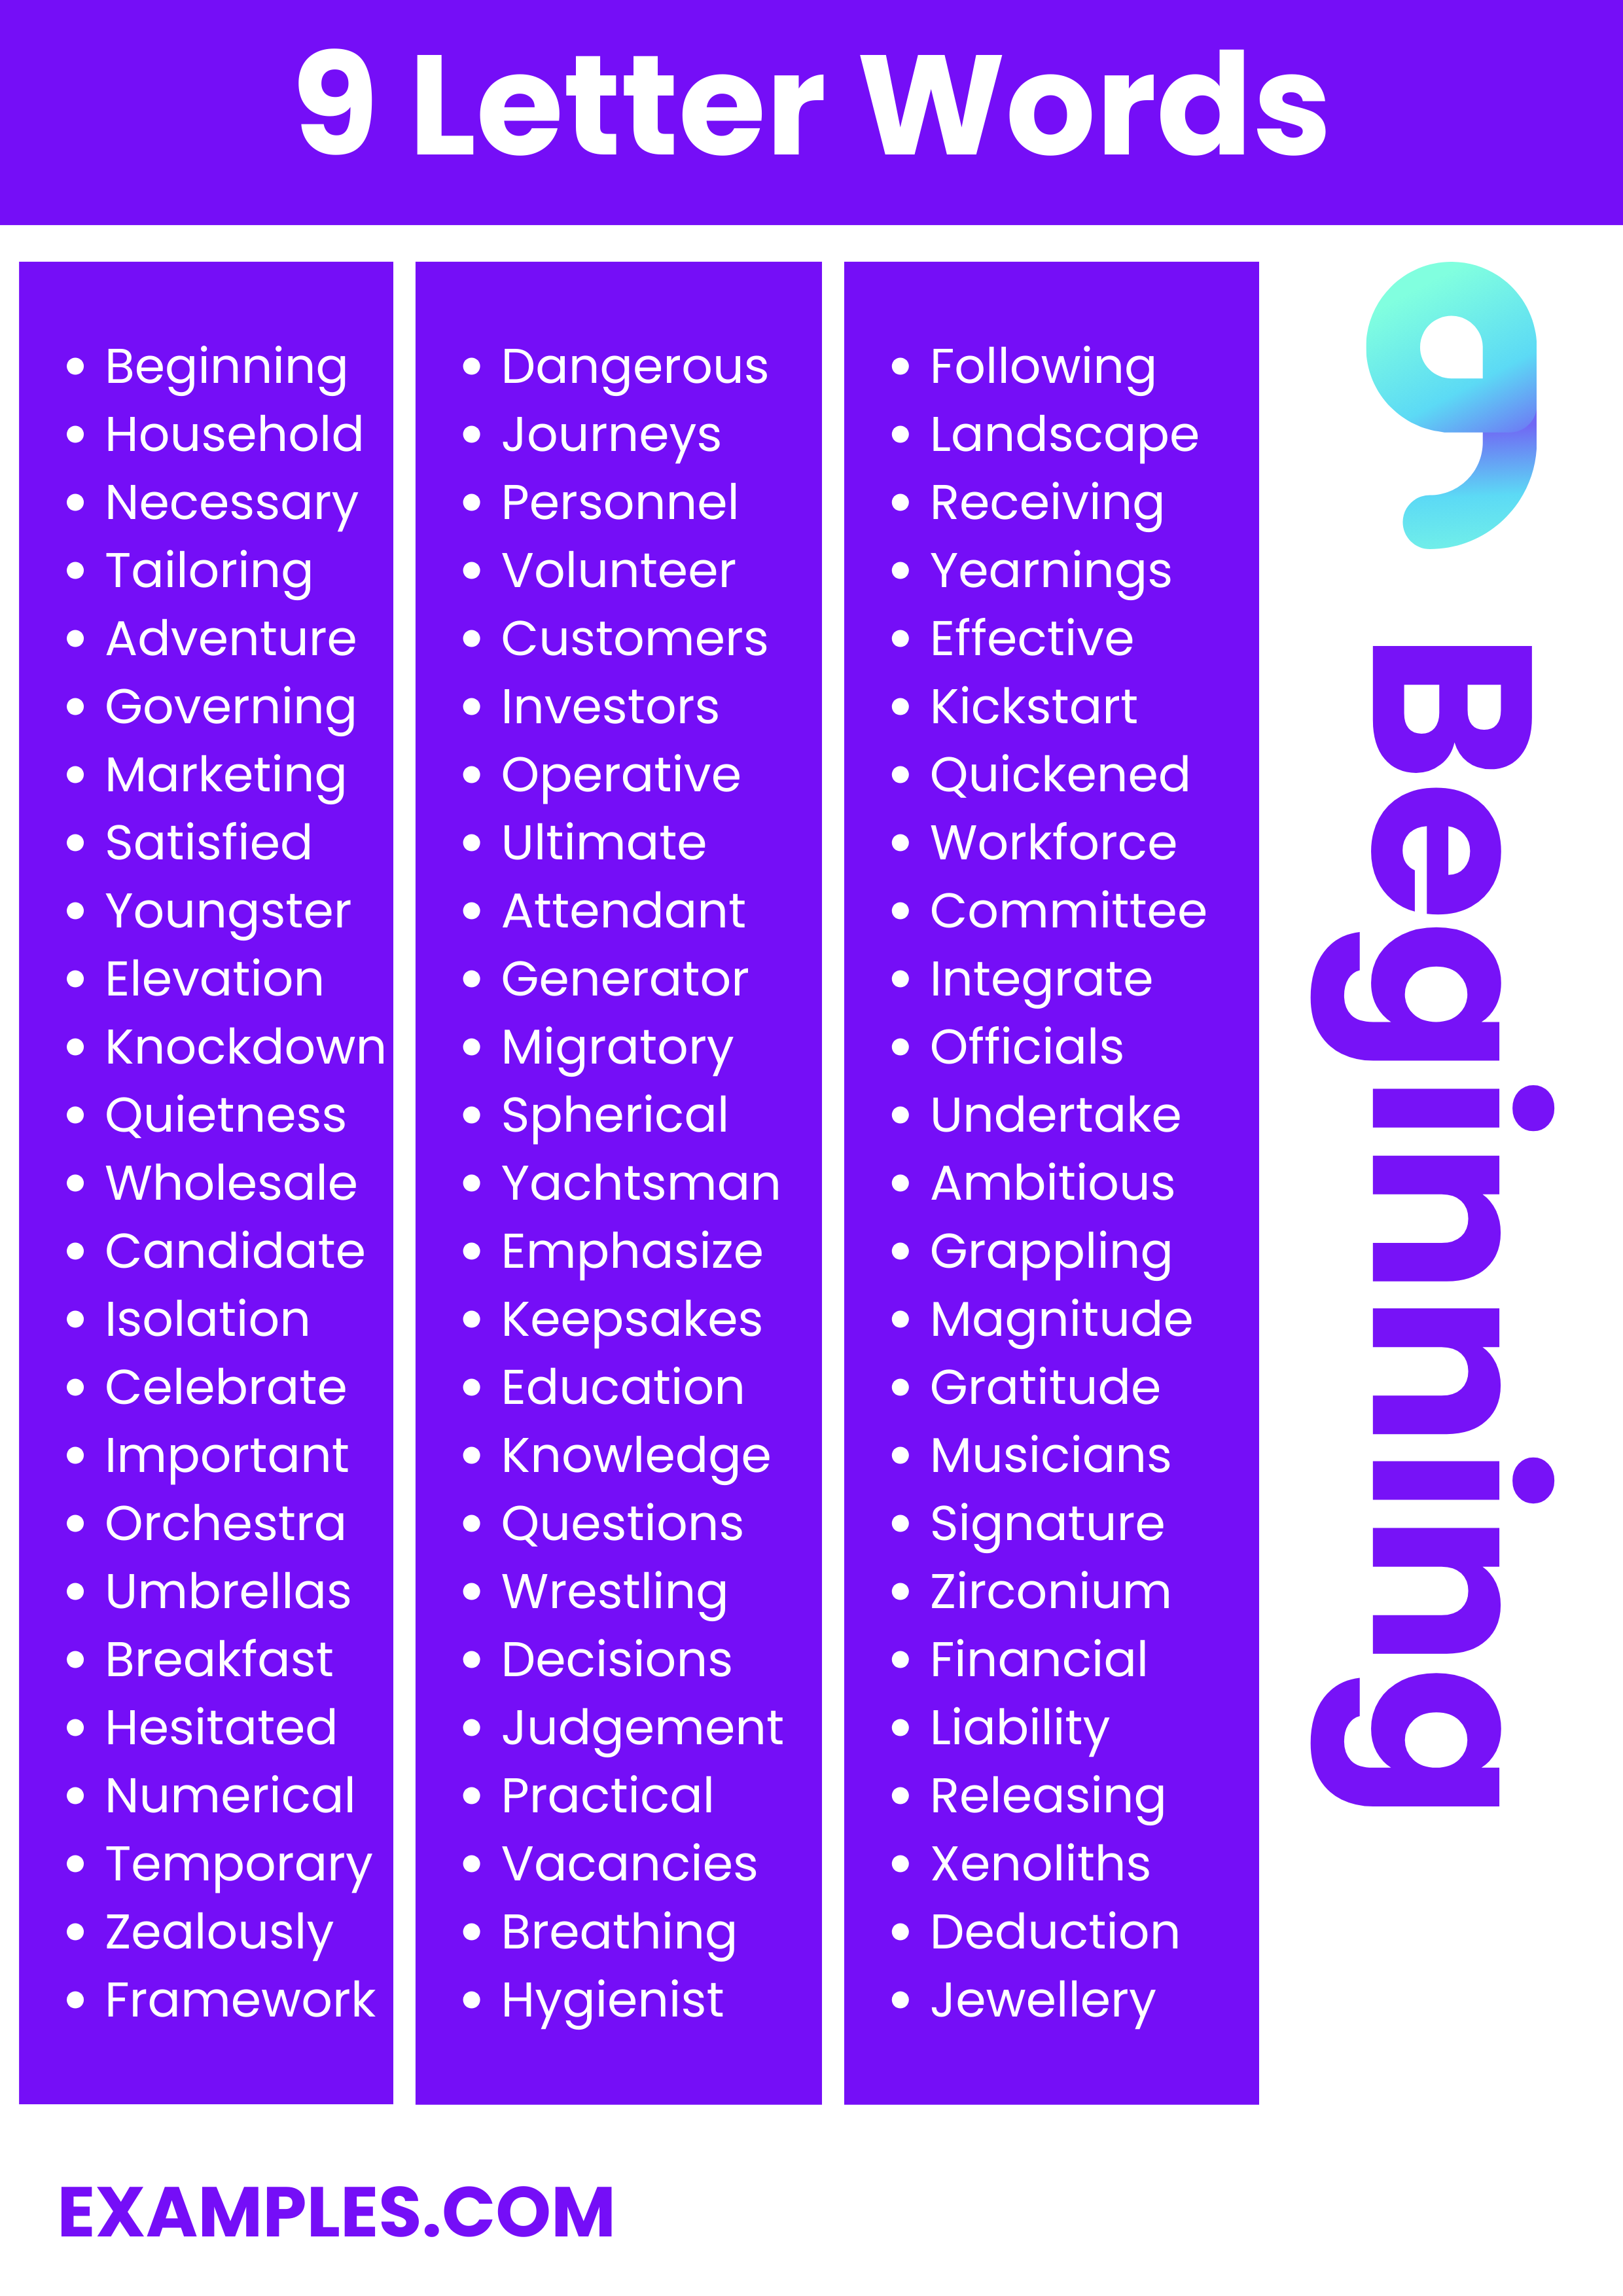 most commonly used a 9 letter wordscommonly used a 9 letter words